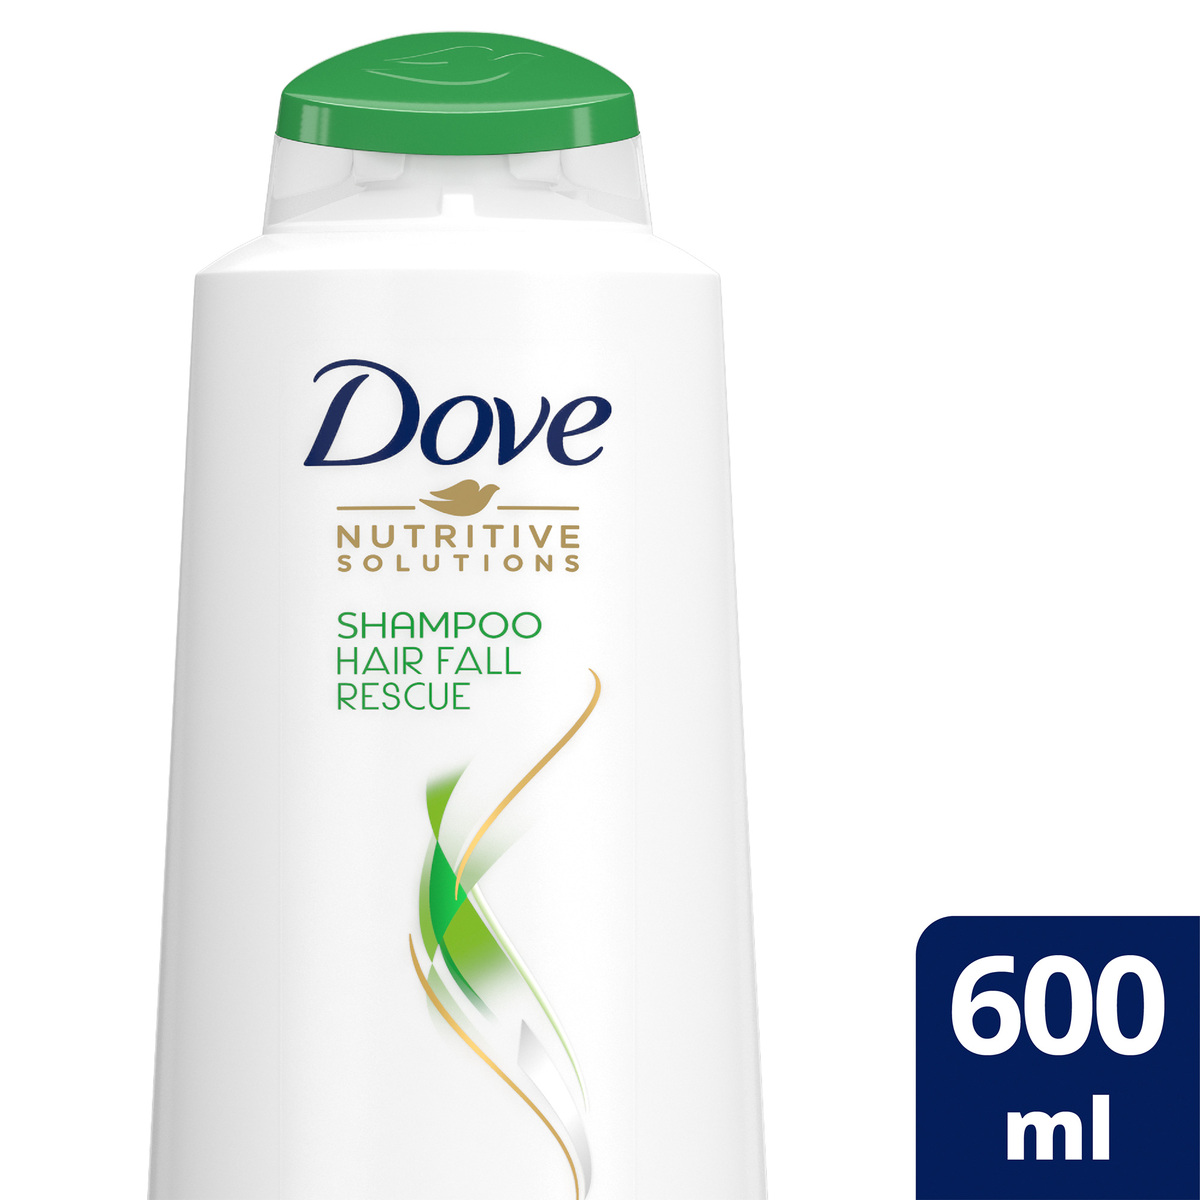 Buy Dove Nutritive Solutions Hair Fall Rescue Shampoo 600 ml Online at Best Price | Shampoo | Lulu Egypt in Kuwait